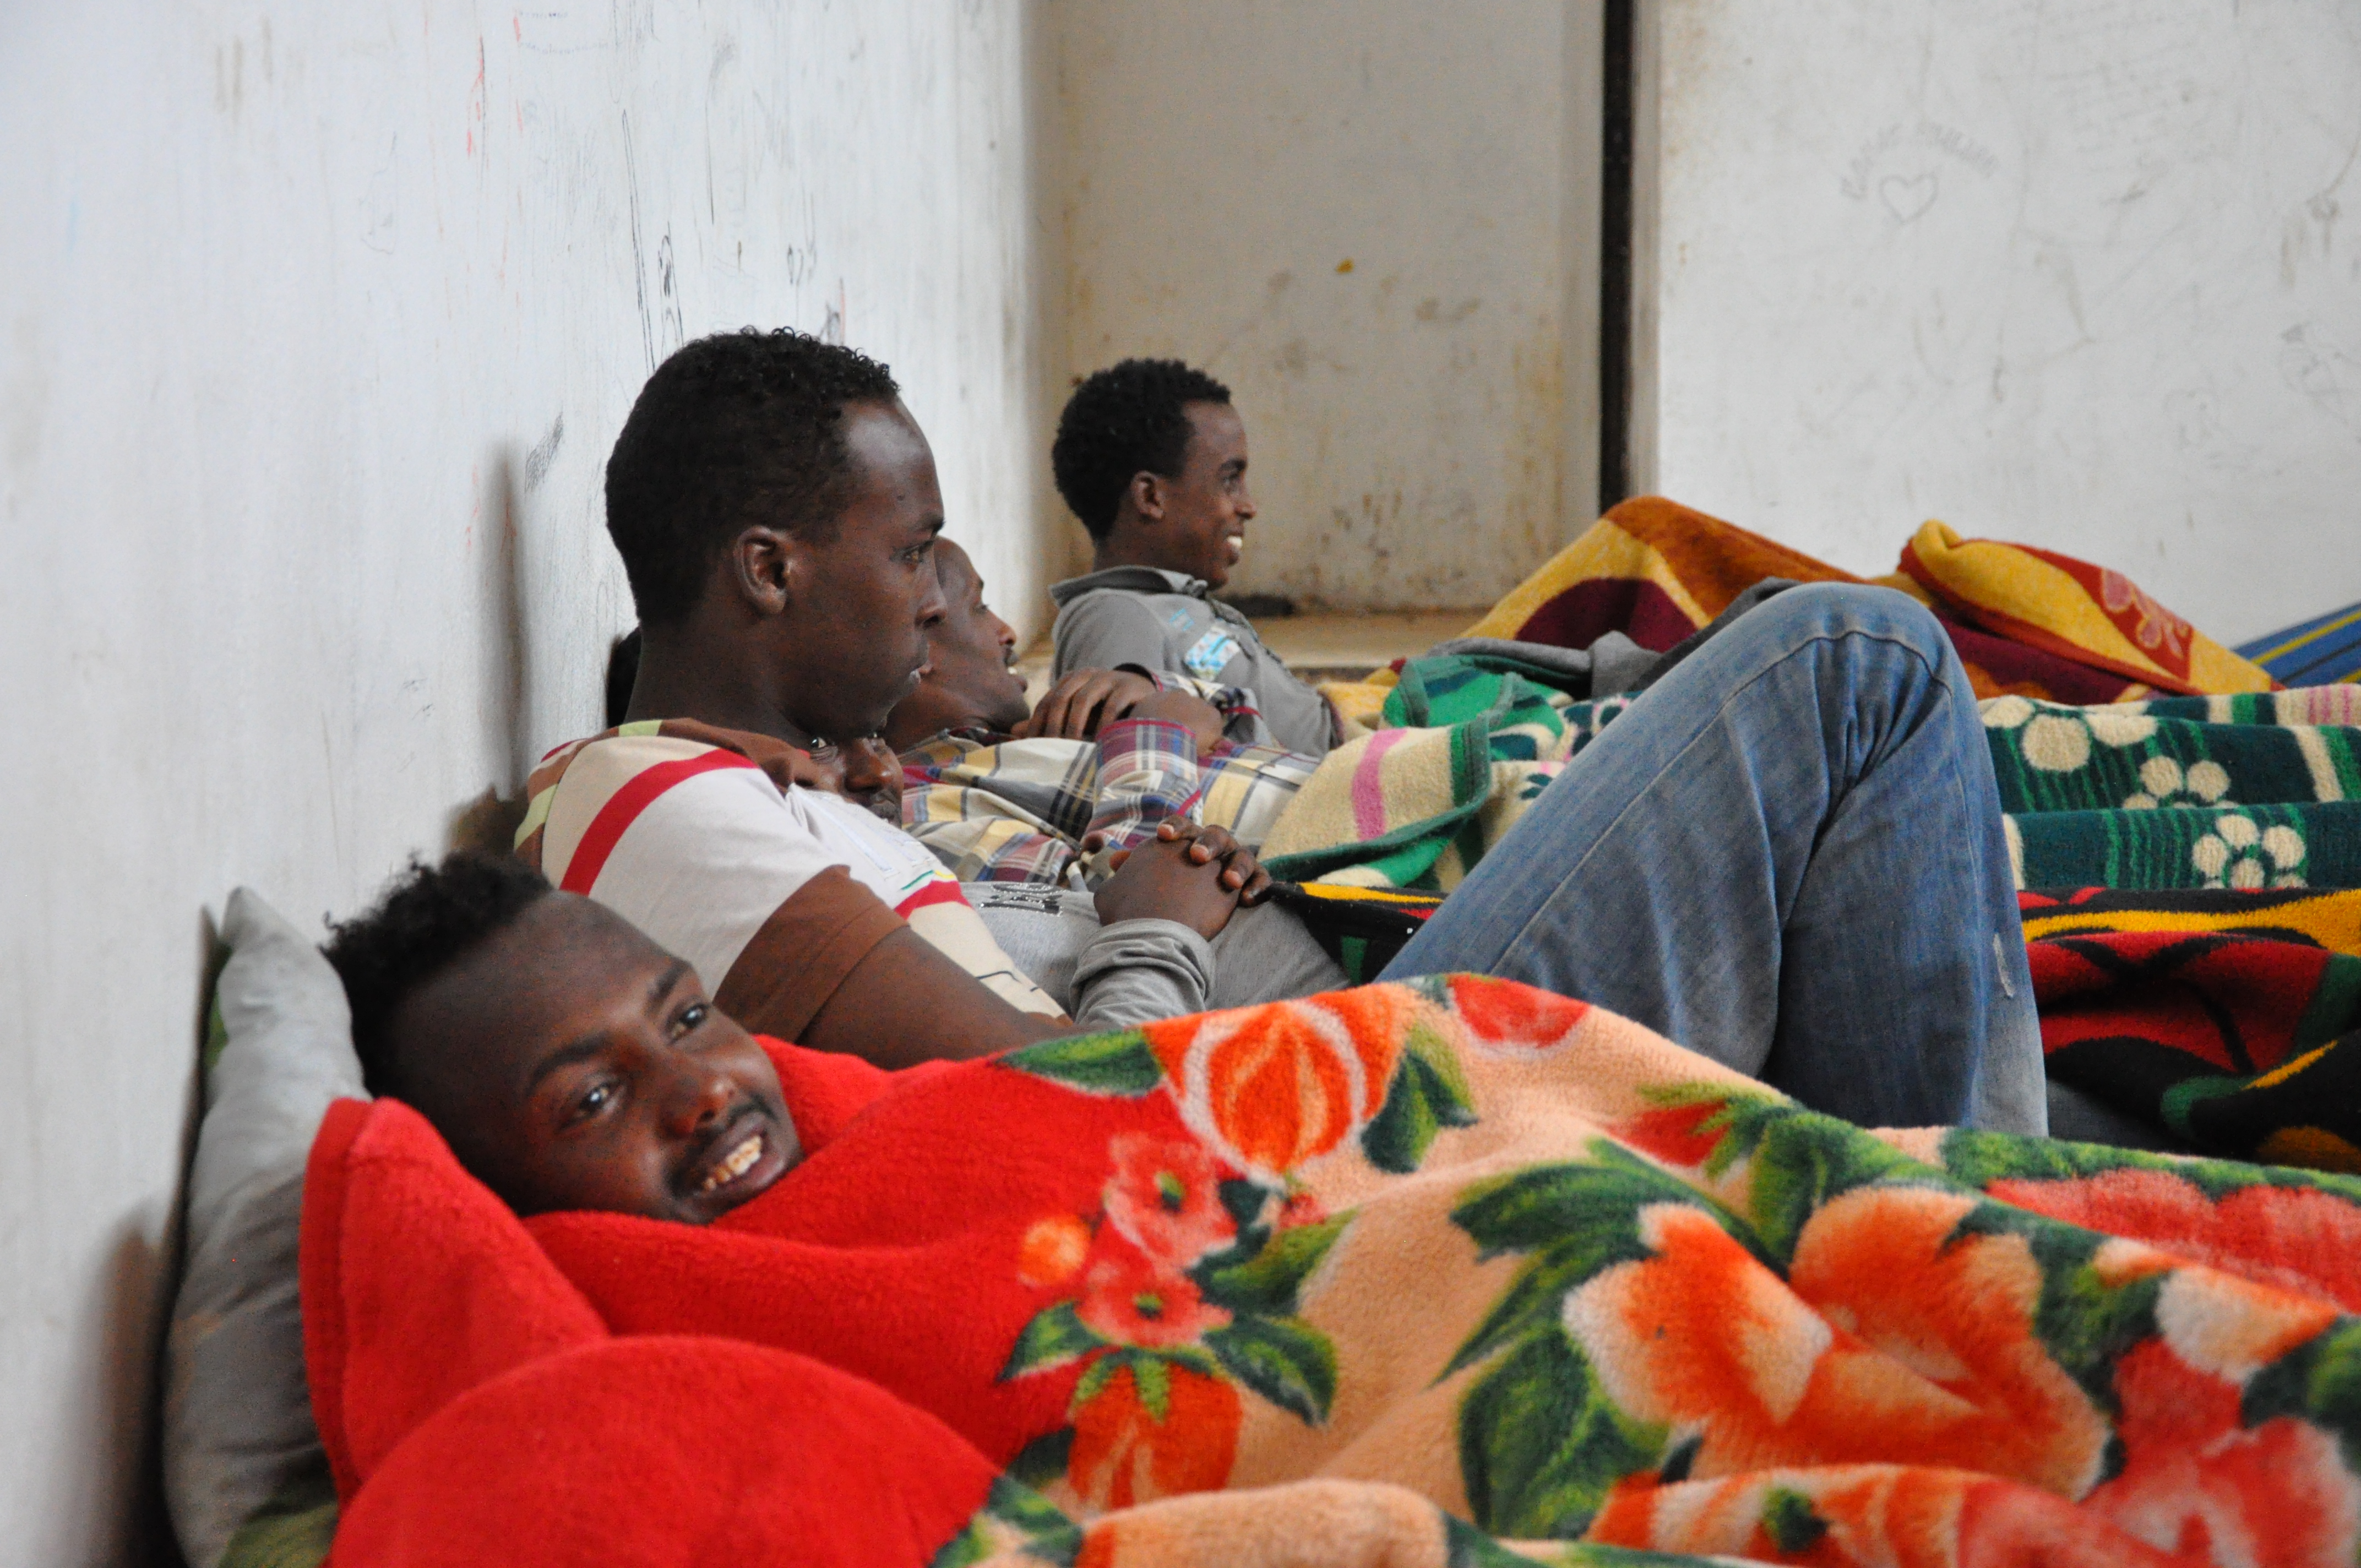 Somali migrants make up the majority of detainees in Ganfouda detention centre, according to the authorities. Photo: Zahra Moloo/IRIN